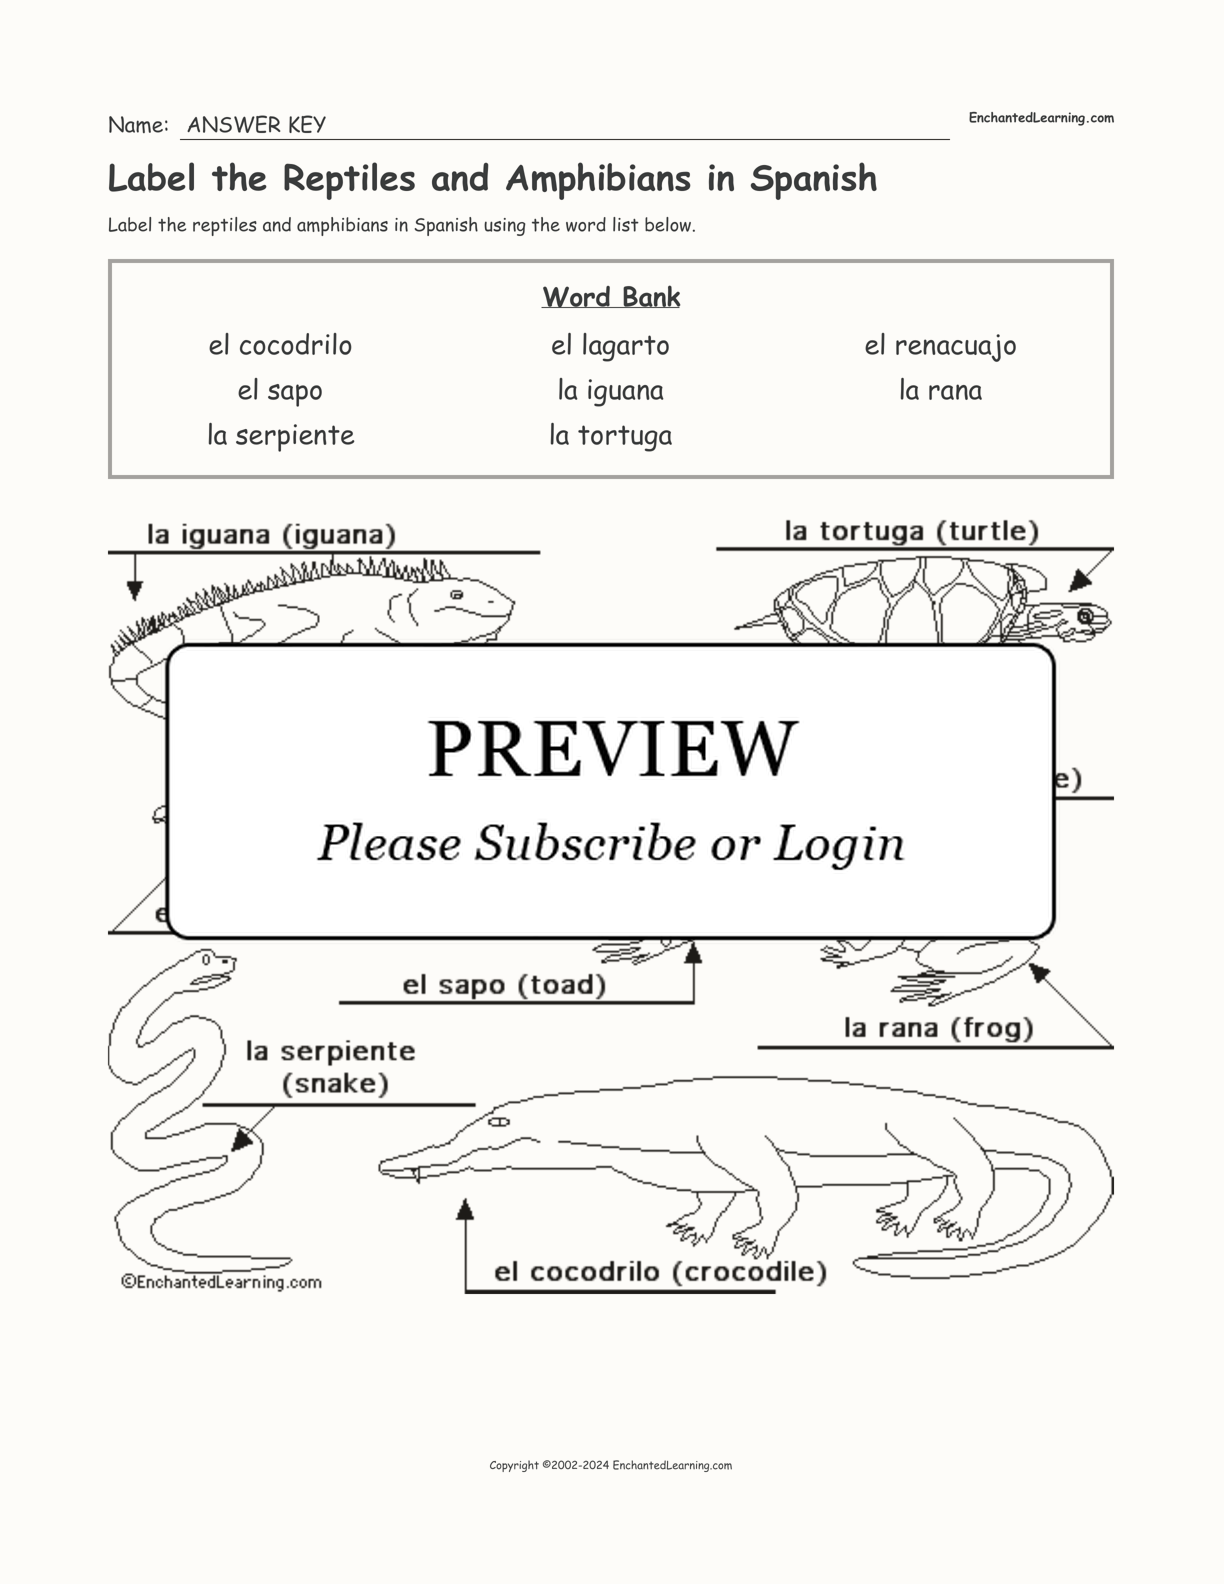 Label the Reptiles and Amphibians in Spanish interactive worksheet page 2